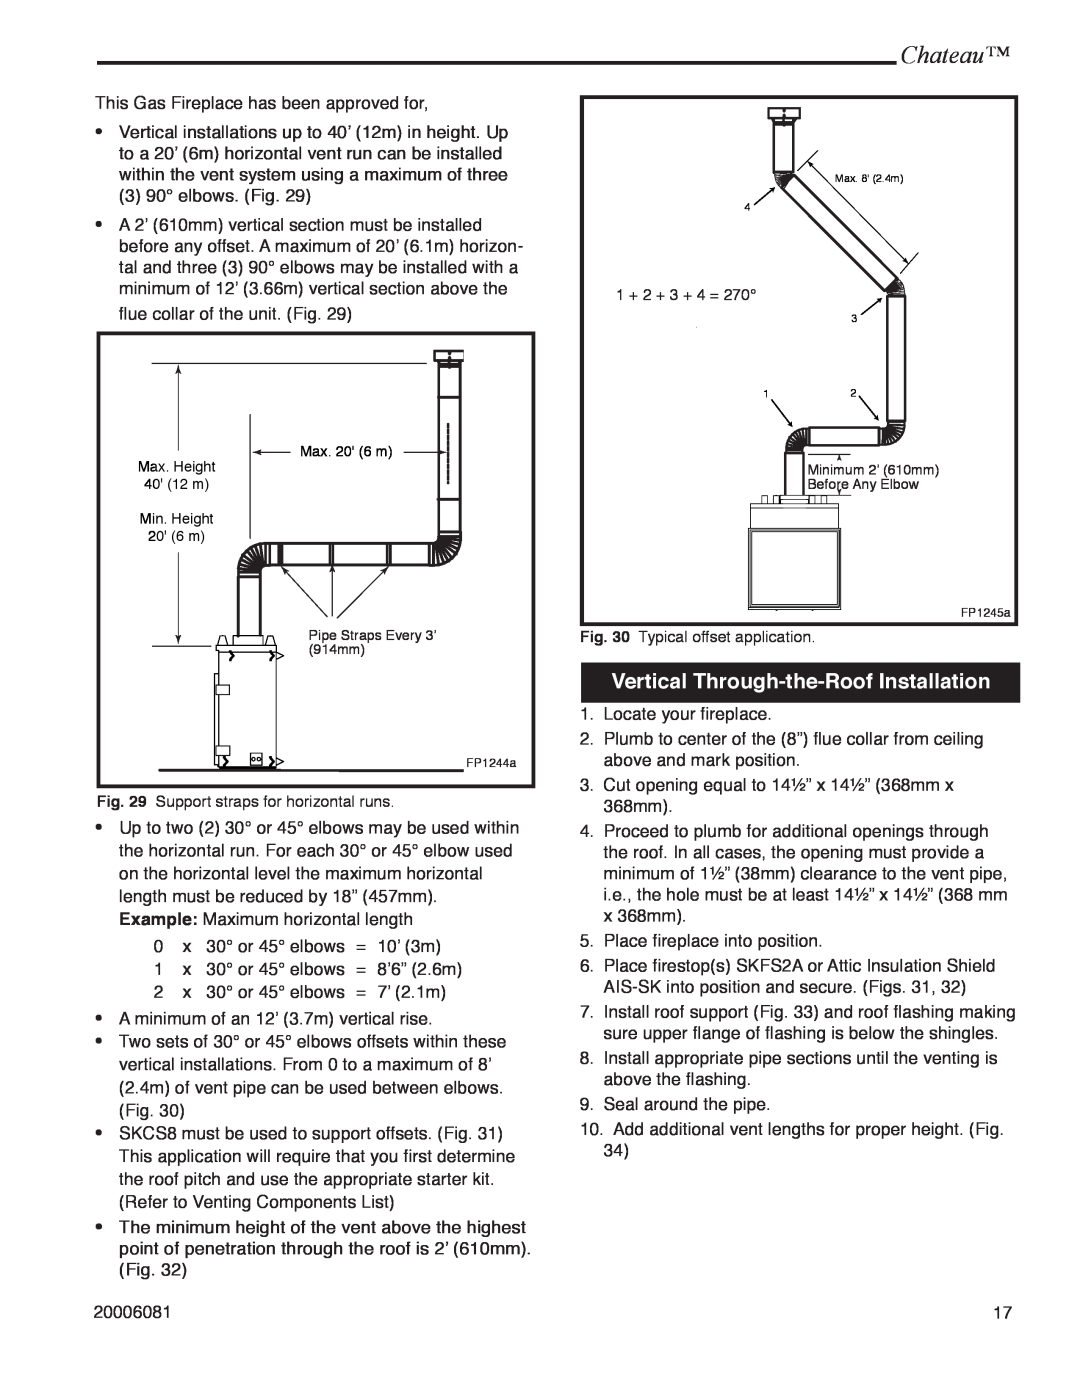 Vermont Casting DVT38 installation instructions Vertical Through-the-RoofInstallation, Chateau 